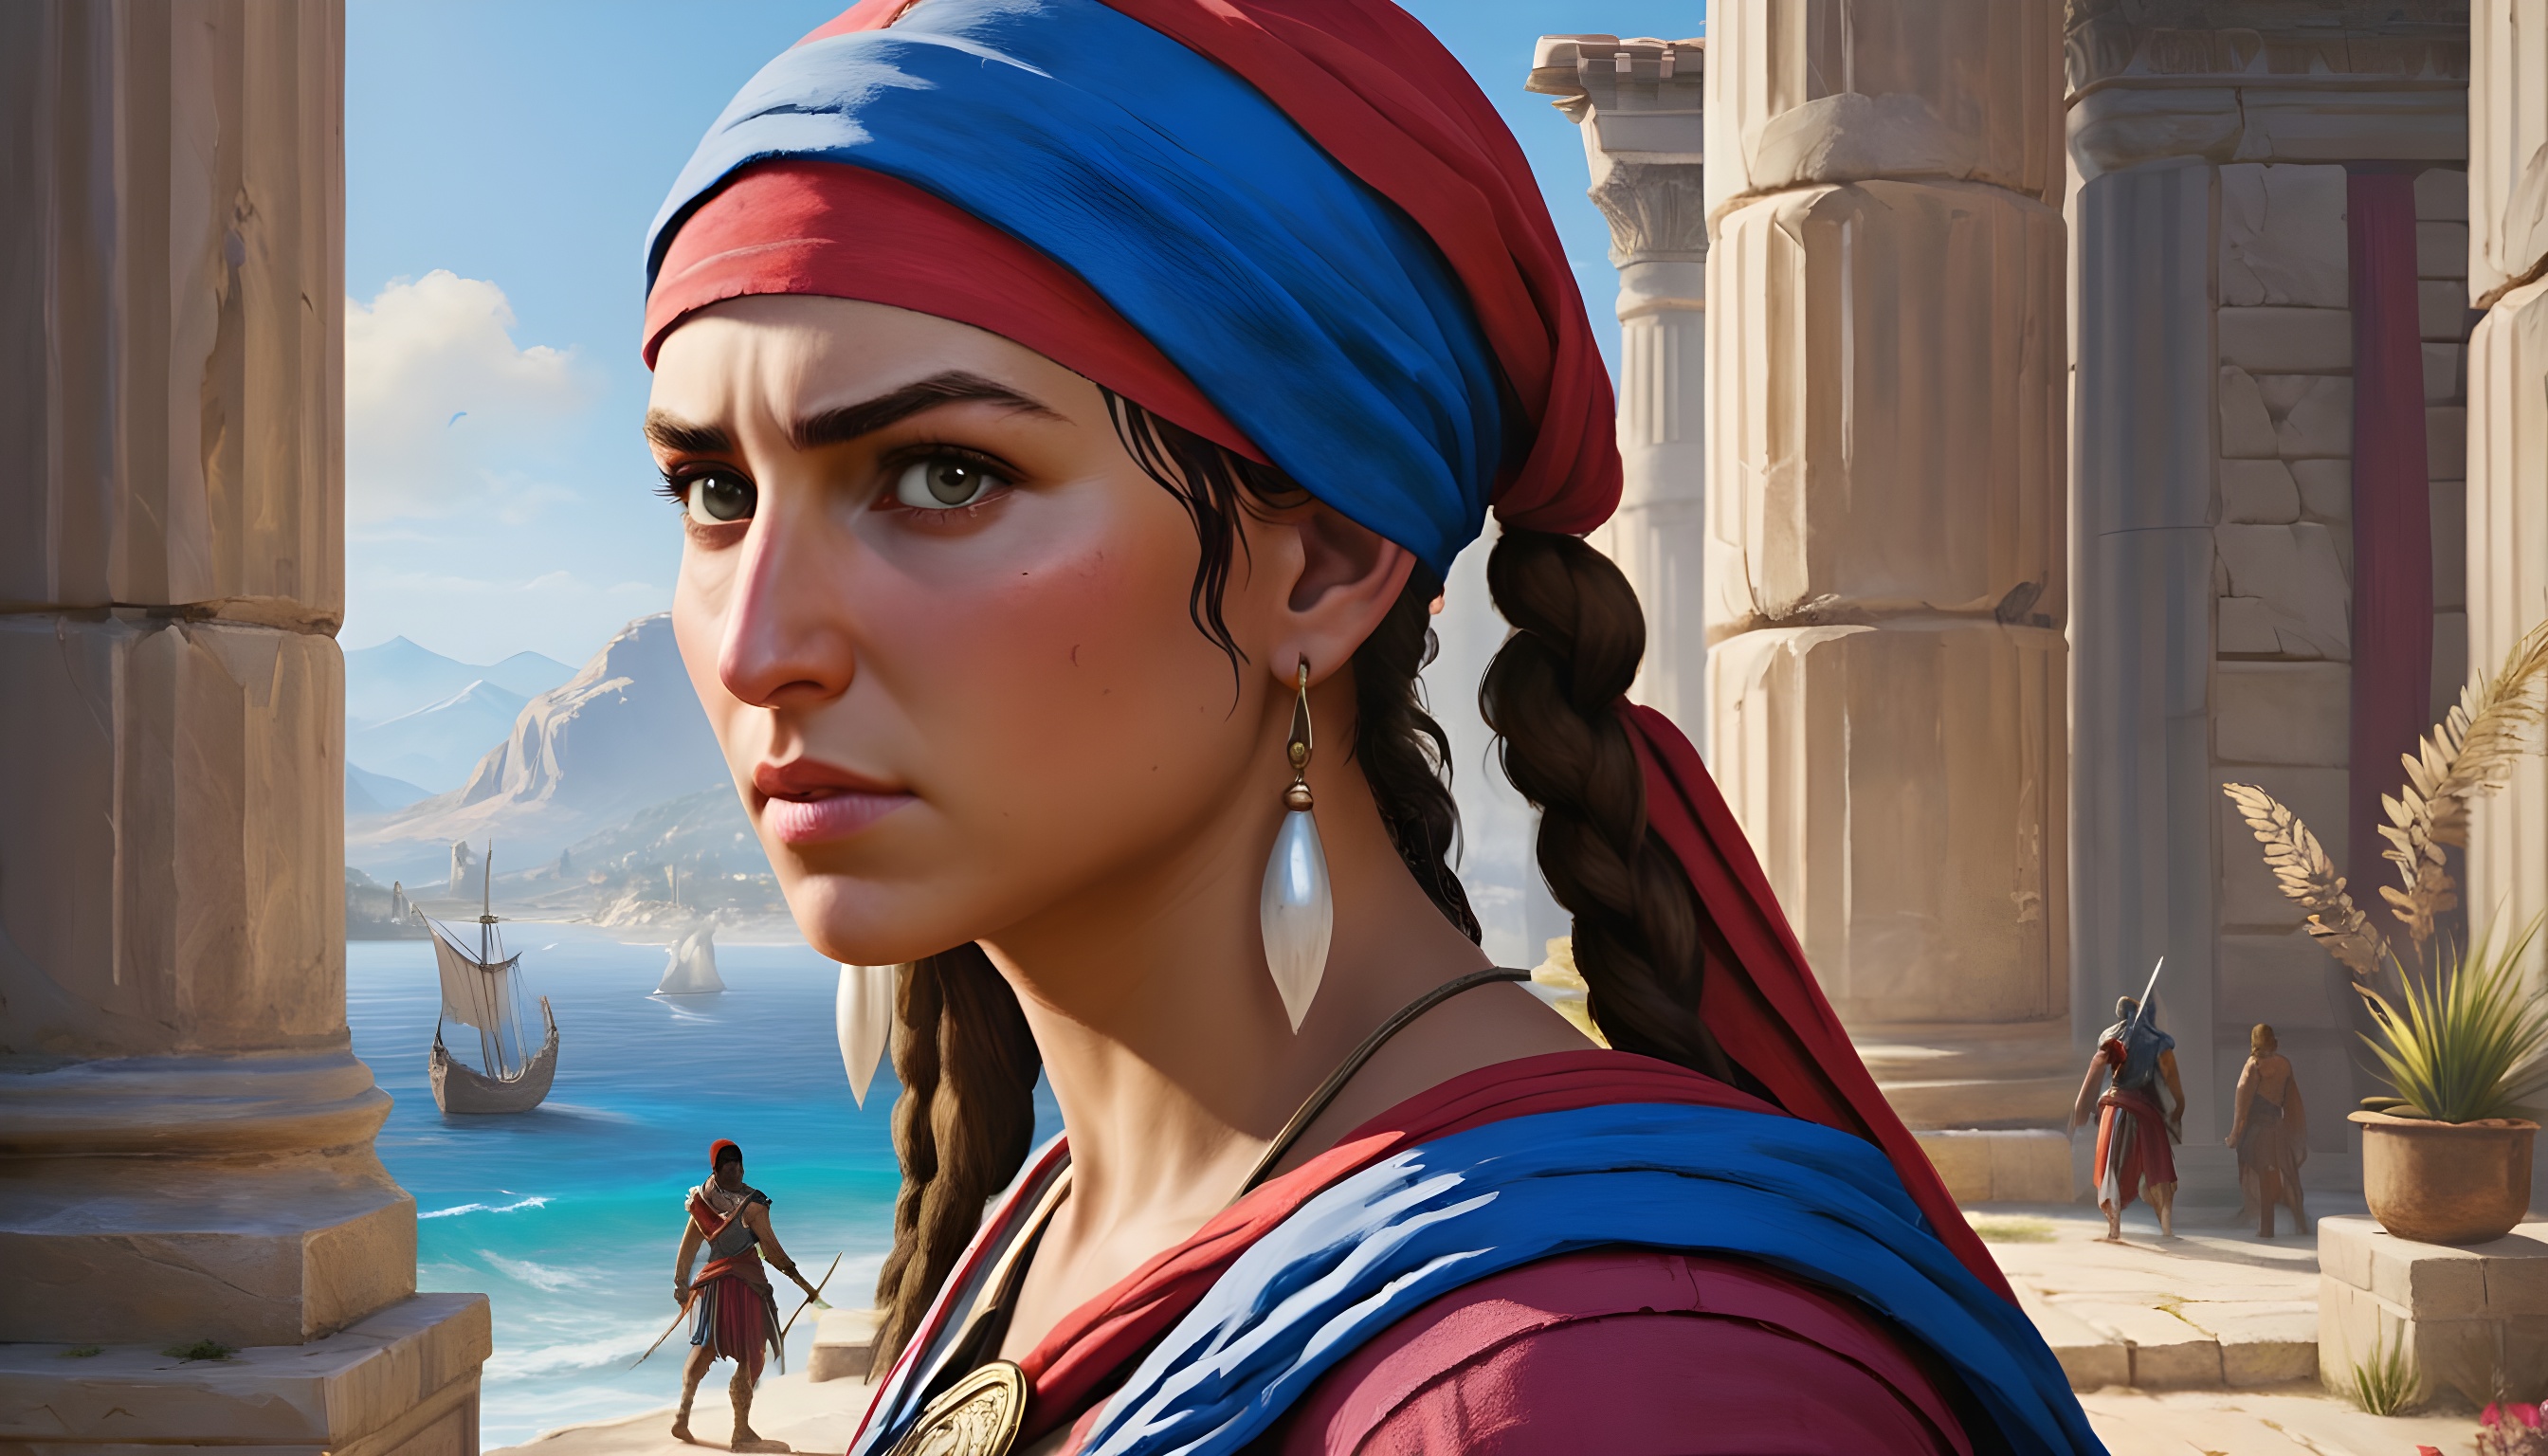 General 2688x1536 Assassin's Creed: Odyssey Assassin's Creed Kassandra painting pearl earrings red blue freepik AI art video game art video game characters sky video game girls pillar parted lips earring long hair braids looking at viewer sunlight boat clouds water brunette